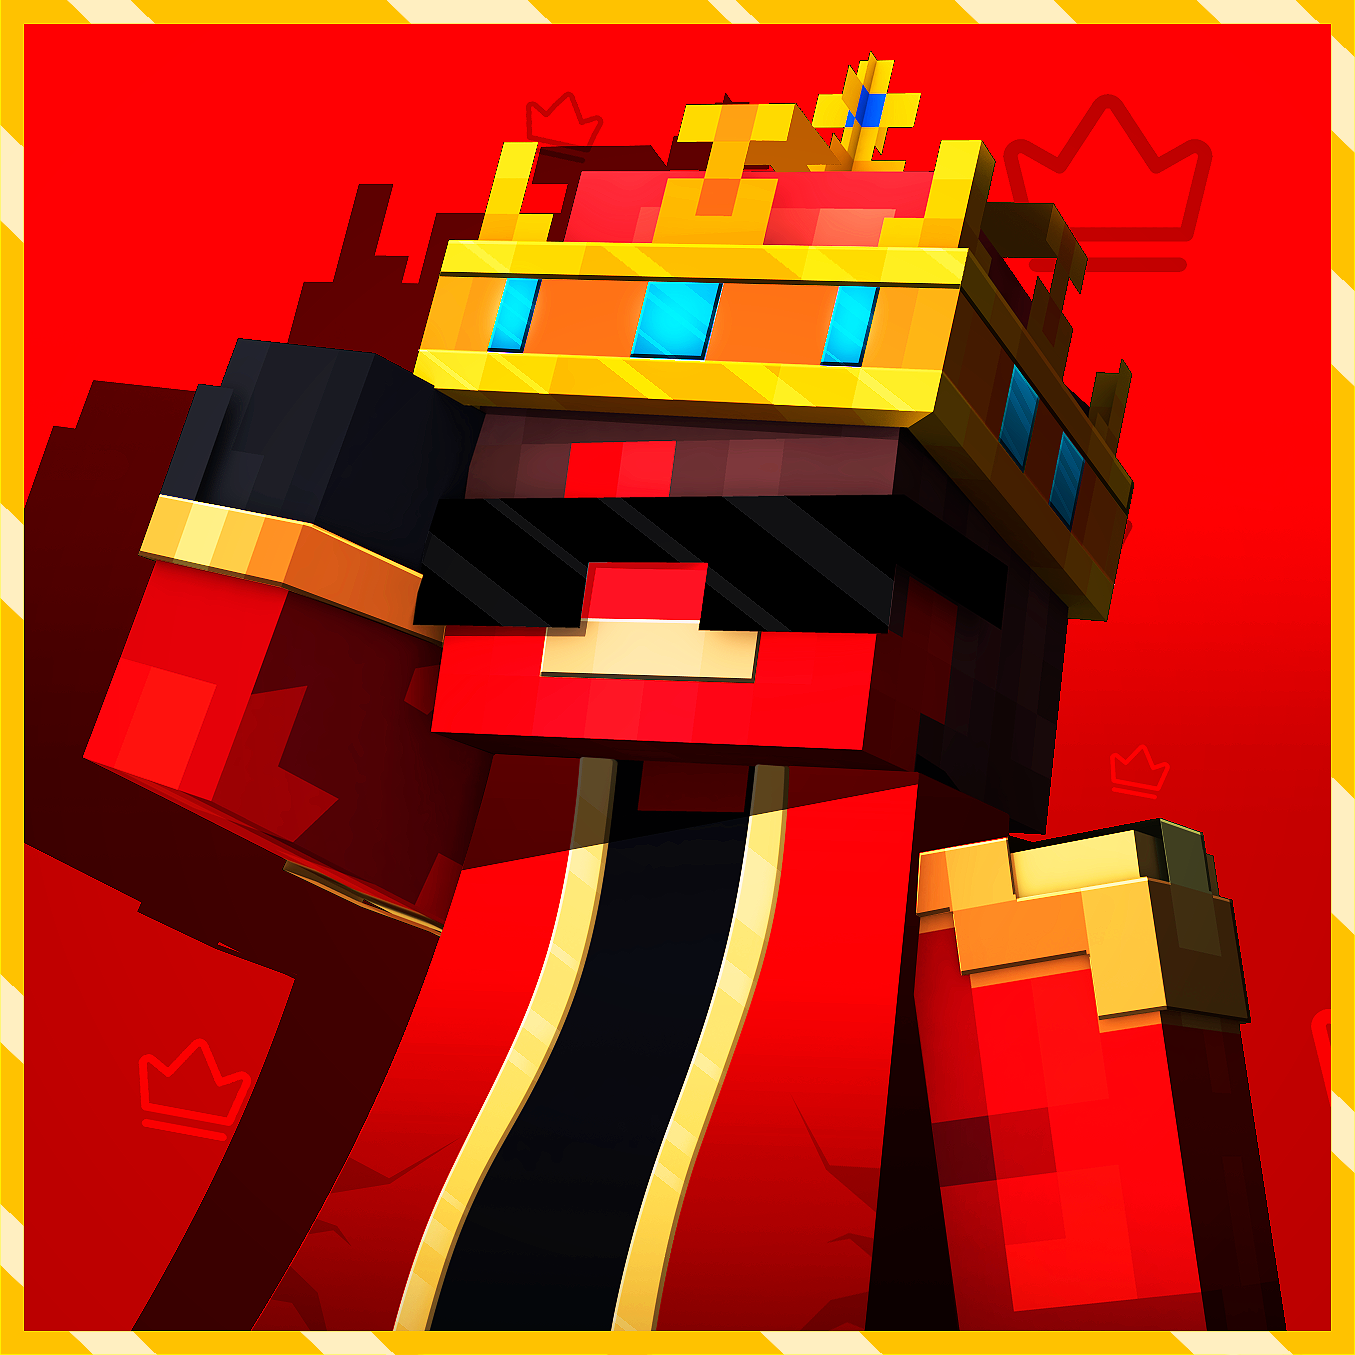 Nickzin's Profile Picture on PvPRP